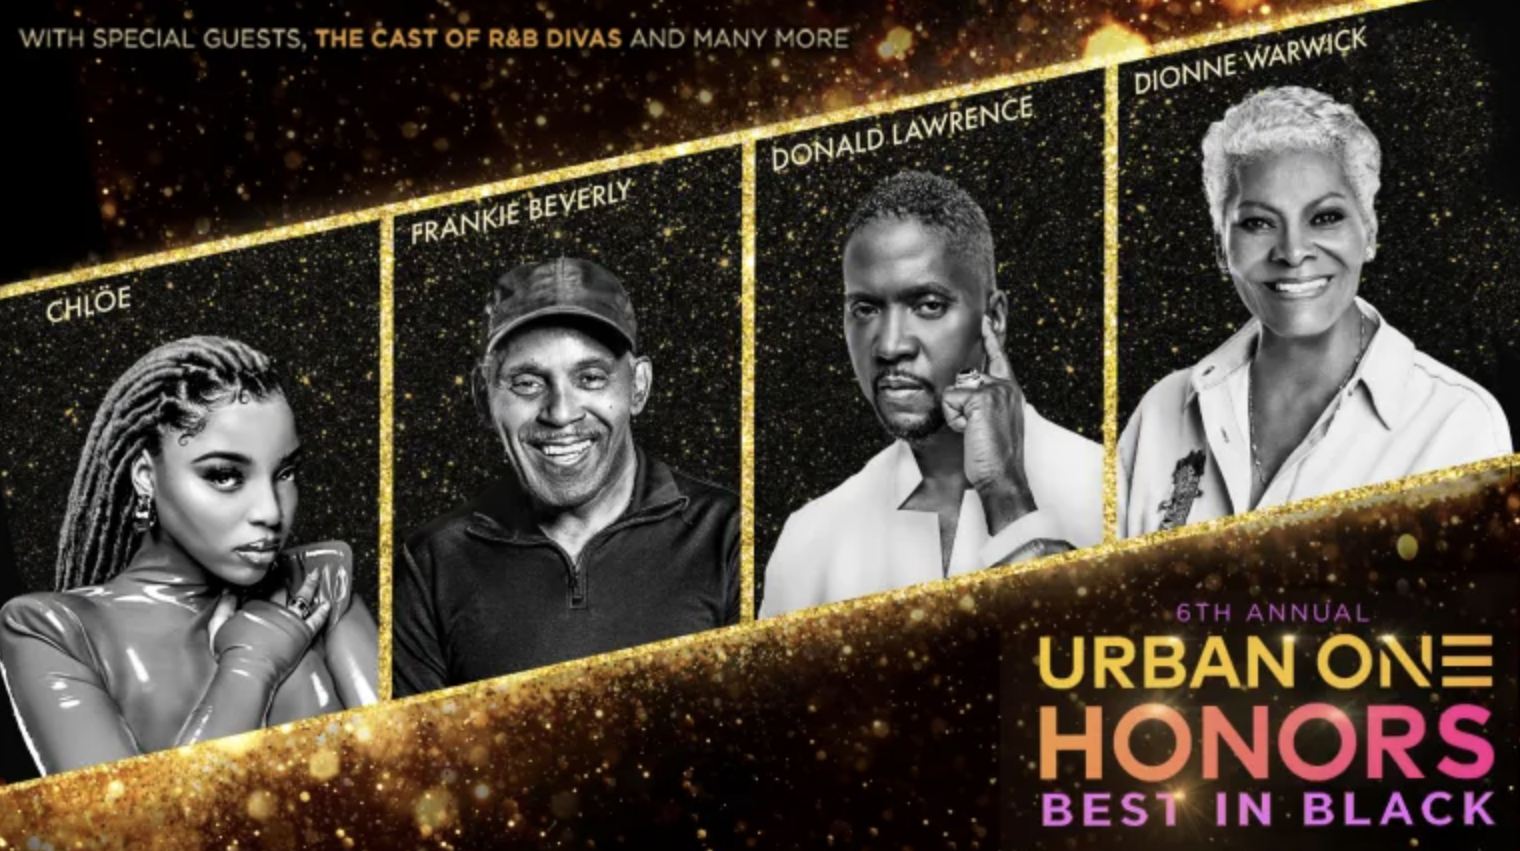 <div>Best In Black: Dionne Warwick, Frankie Beverly, Chlöe & More To Be Honored At The 6th Annual Urban One Honors</div>